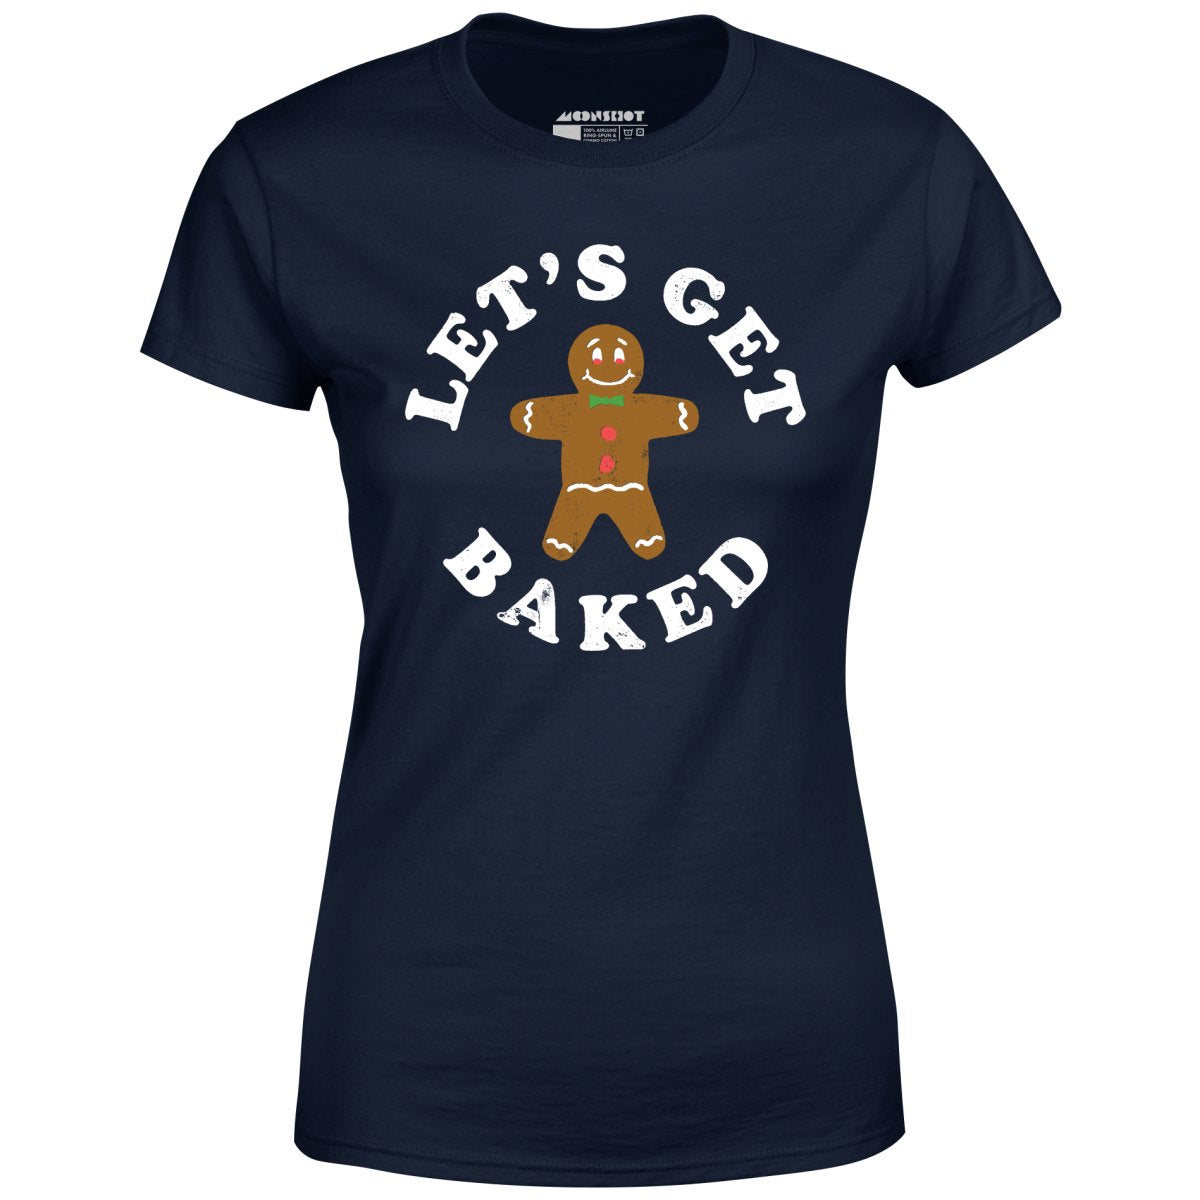 Let's Get Baked - Women's T-Shirt